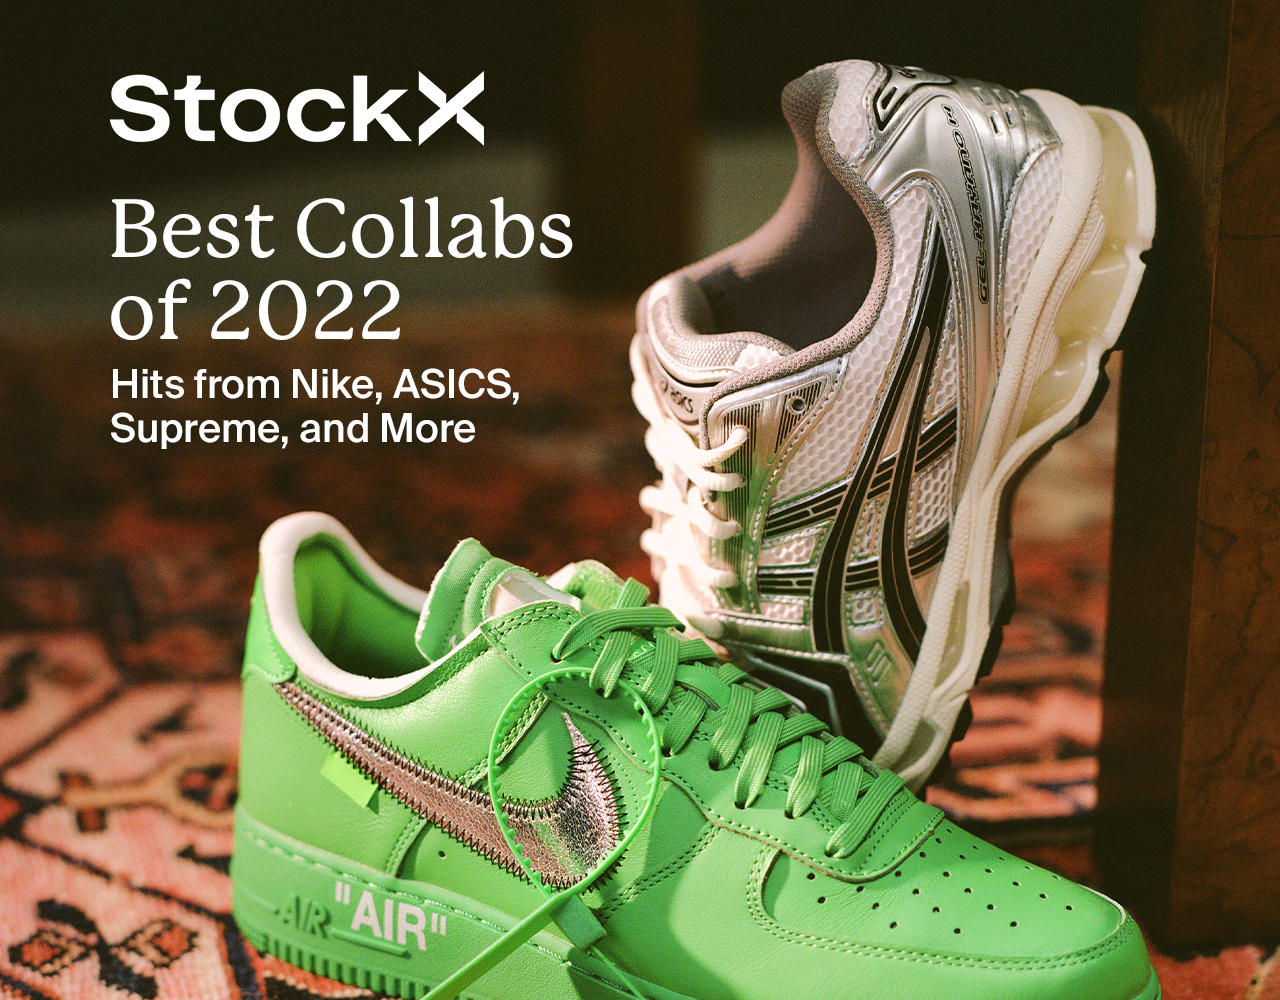 Best Collabs of 2022 - StockX News